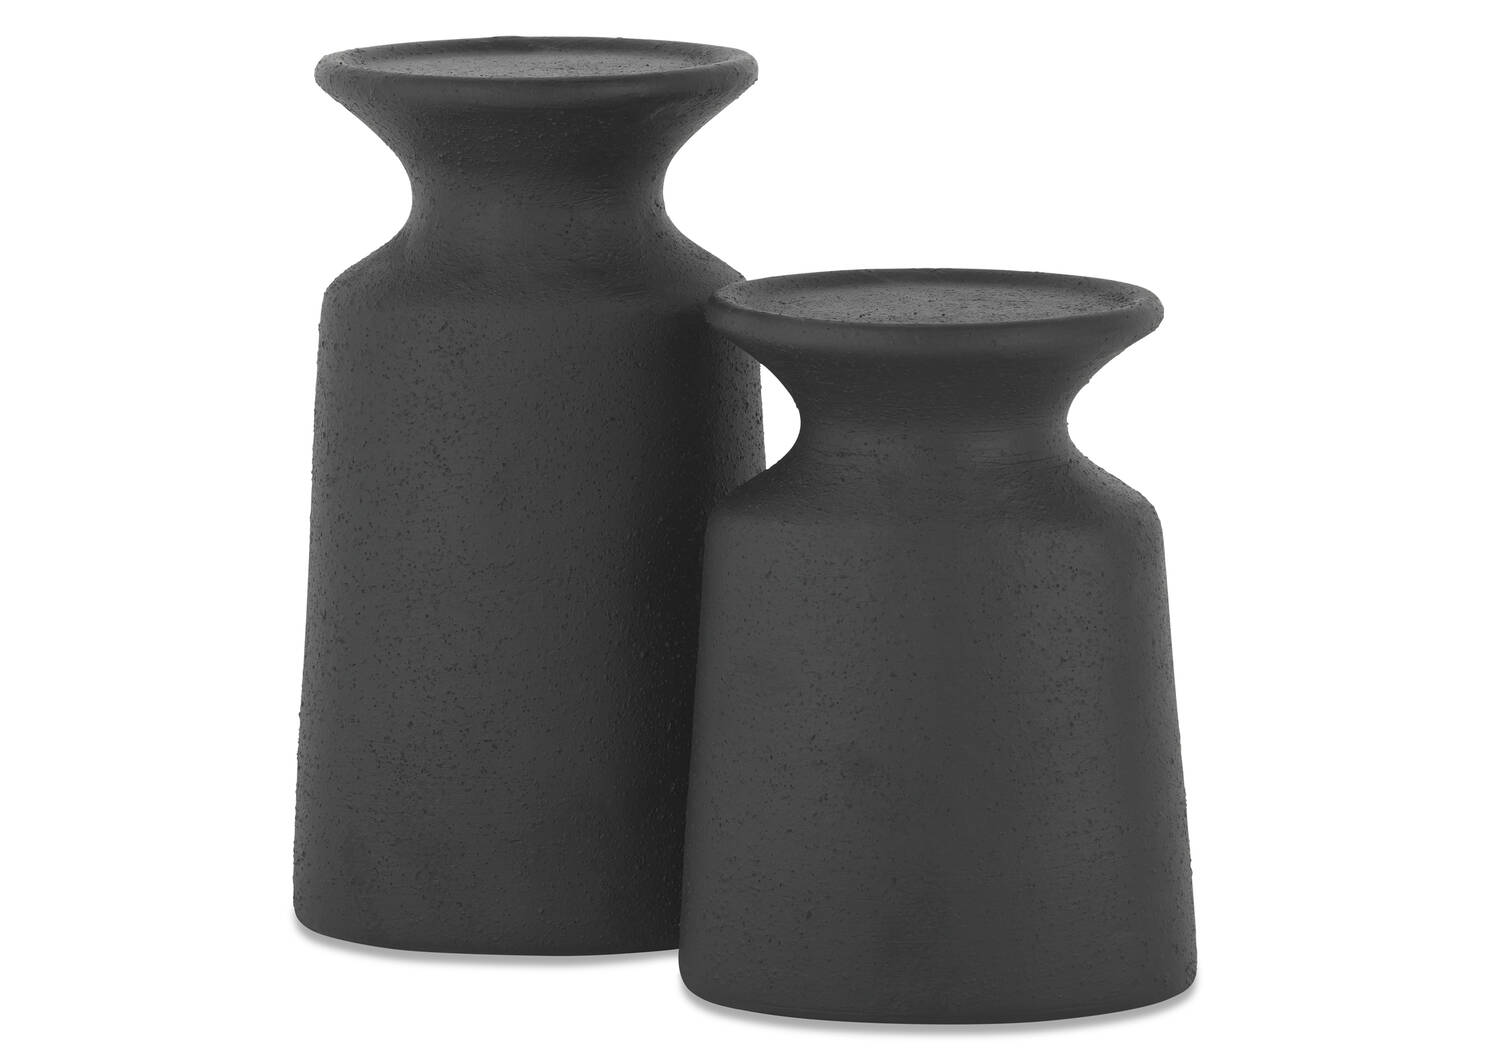 Cillian Candle Holder Tall Black